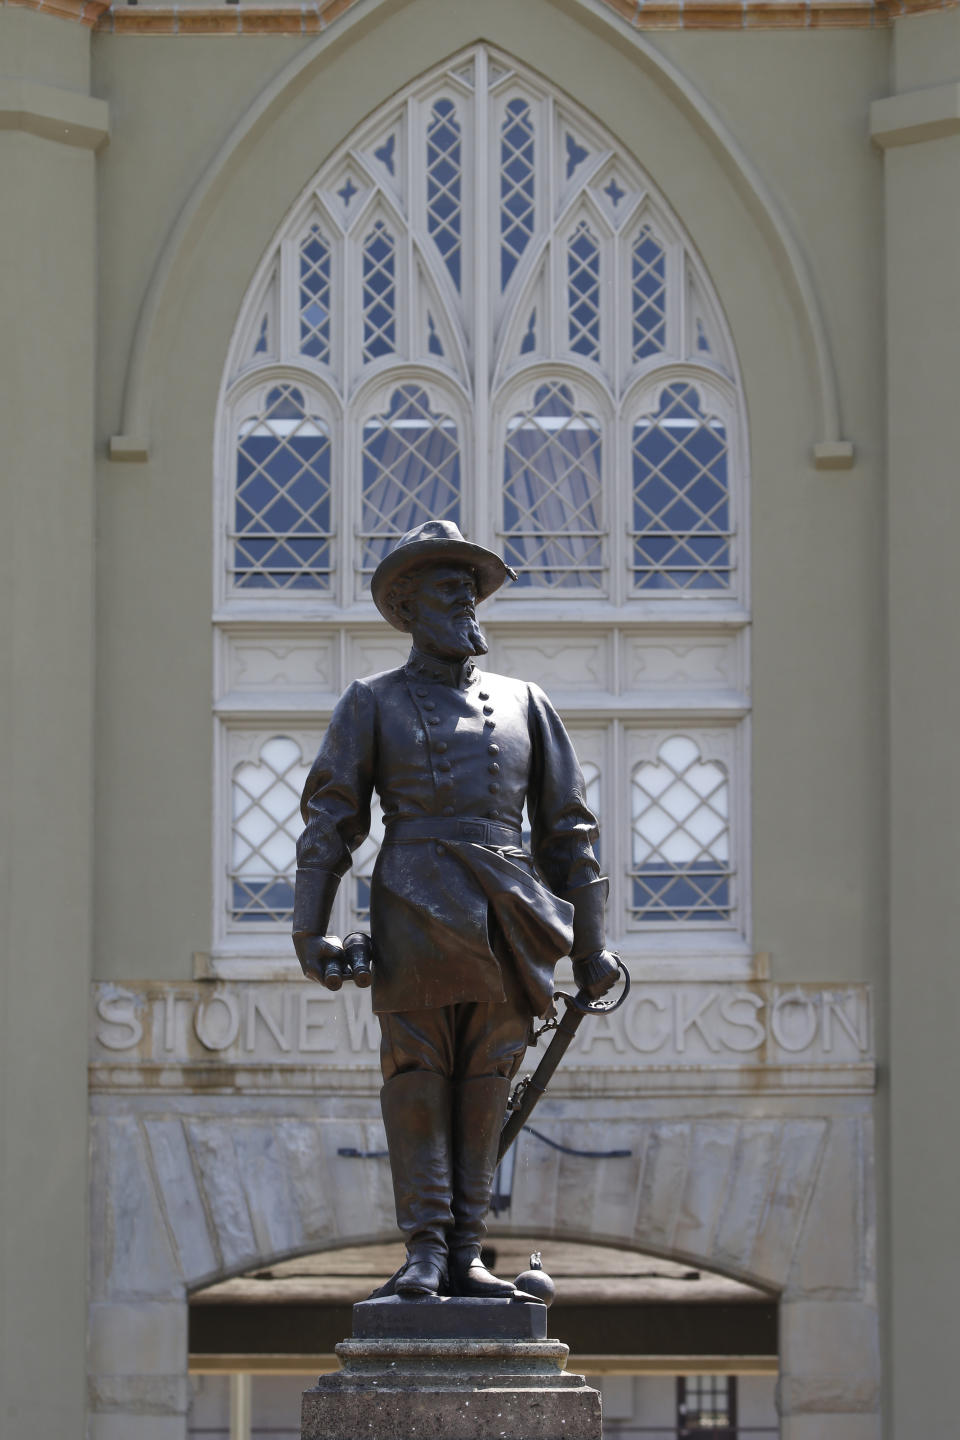 FILE - In this July 15, 2020 file photo the statue of Confederate General Stonewall Jackson stands at the entrance to the barracks at the Virginia Military Institute in Lexington, Va. Virginia Military Institute's Board of Visitors voted Thursday, Oct. 30 to remove the prominent statue. (AP Photo/Steve Helber)